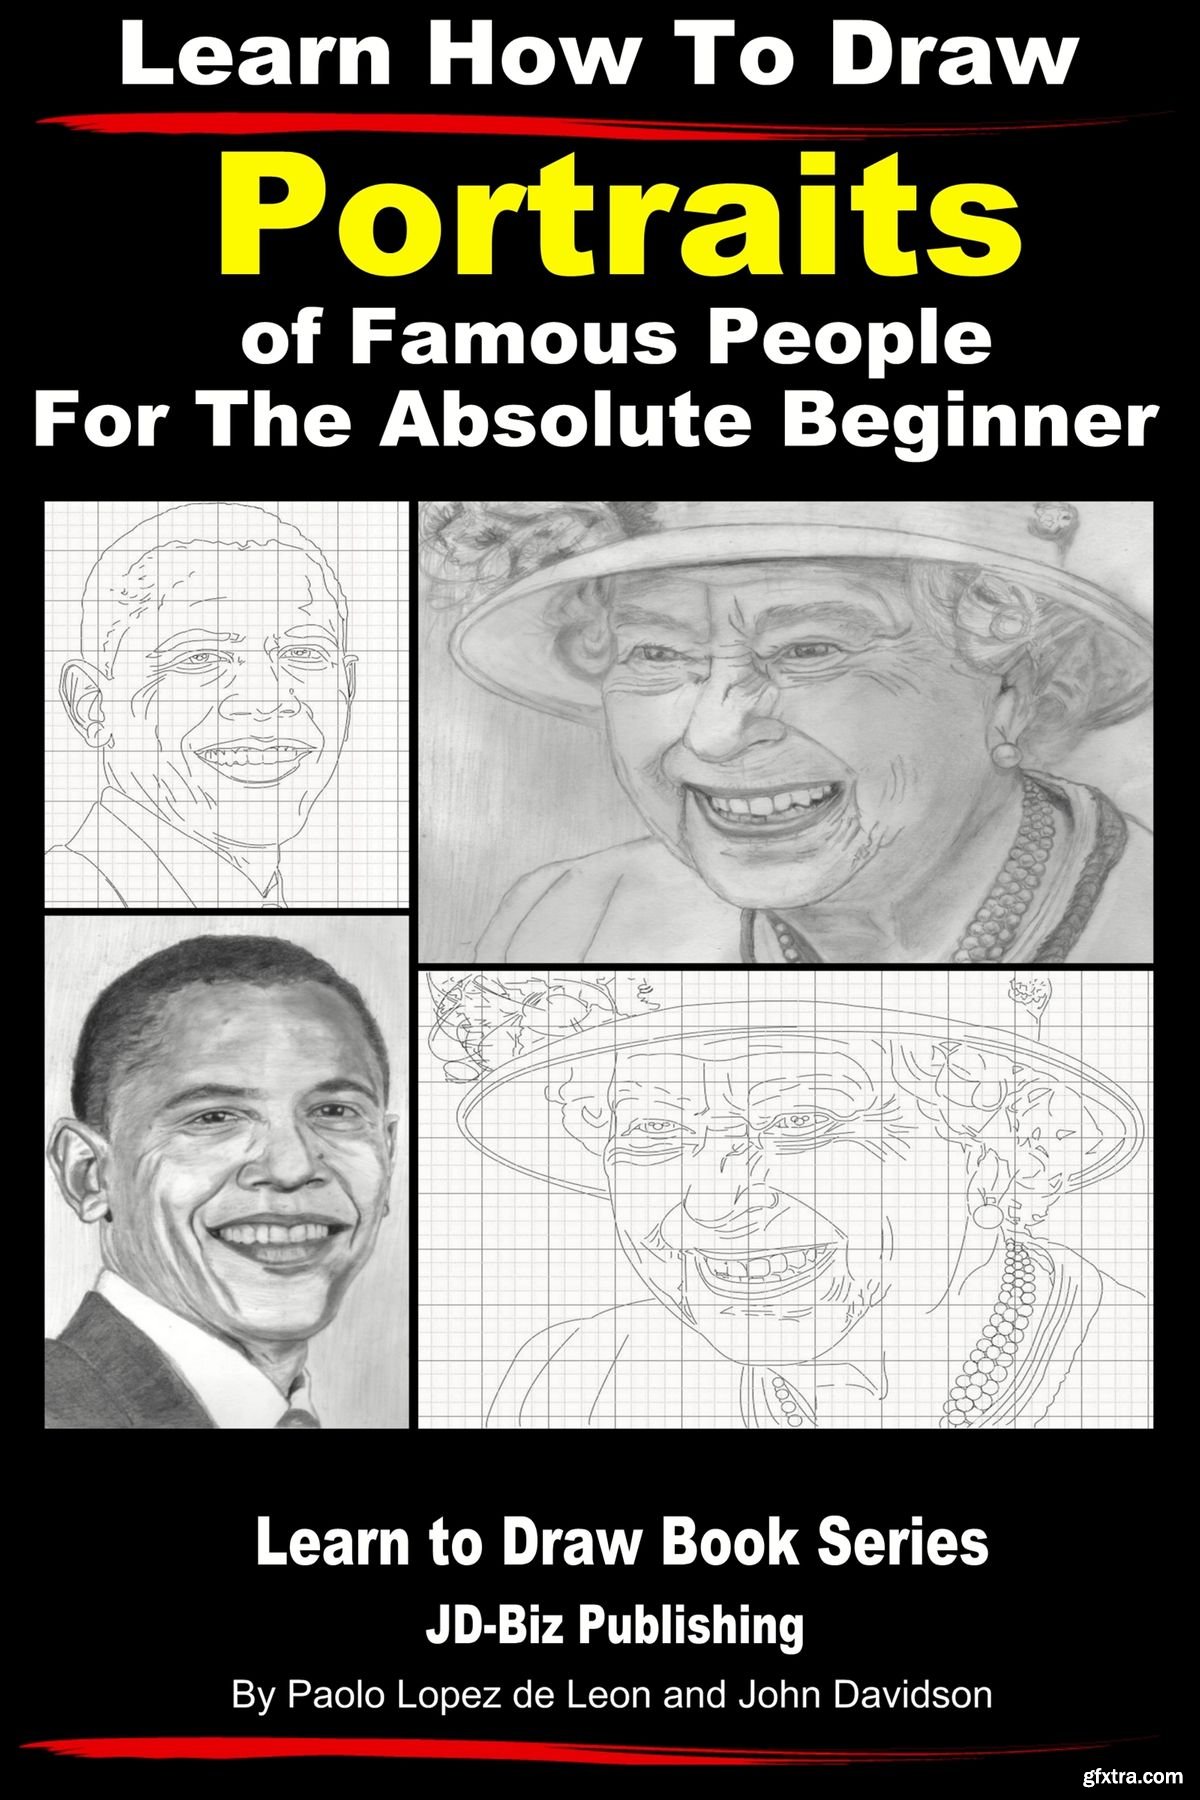 learn-how-to-draw-portraits-of-famous-people-in-pencil-for-the-absolute